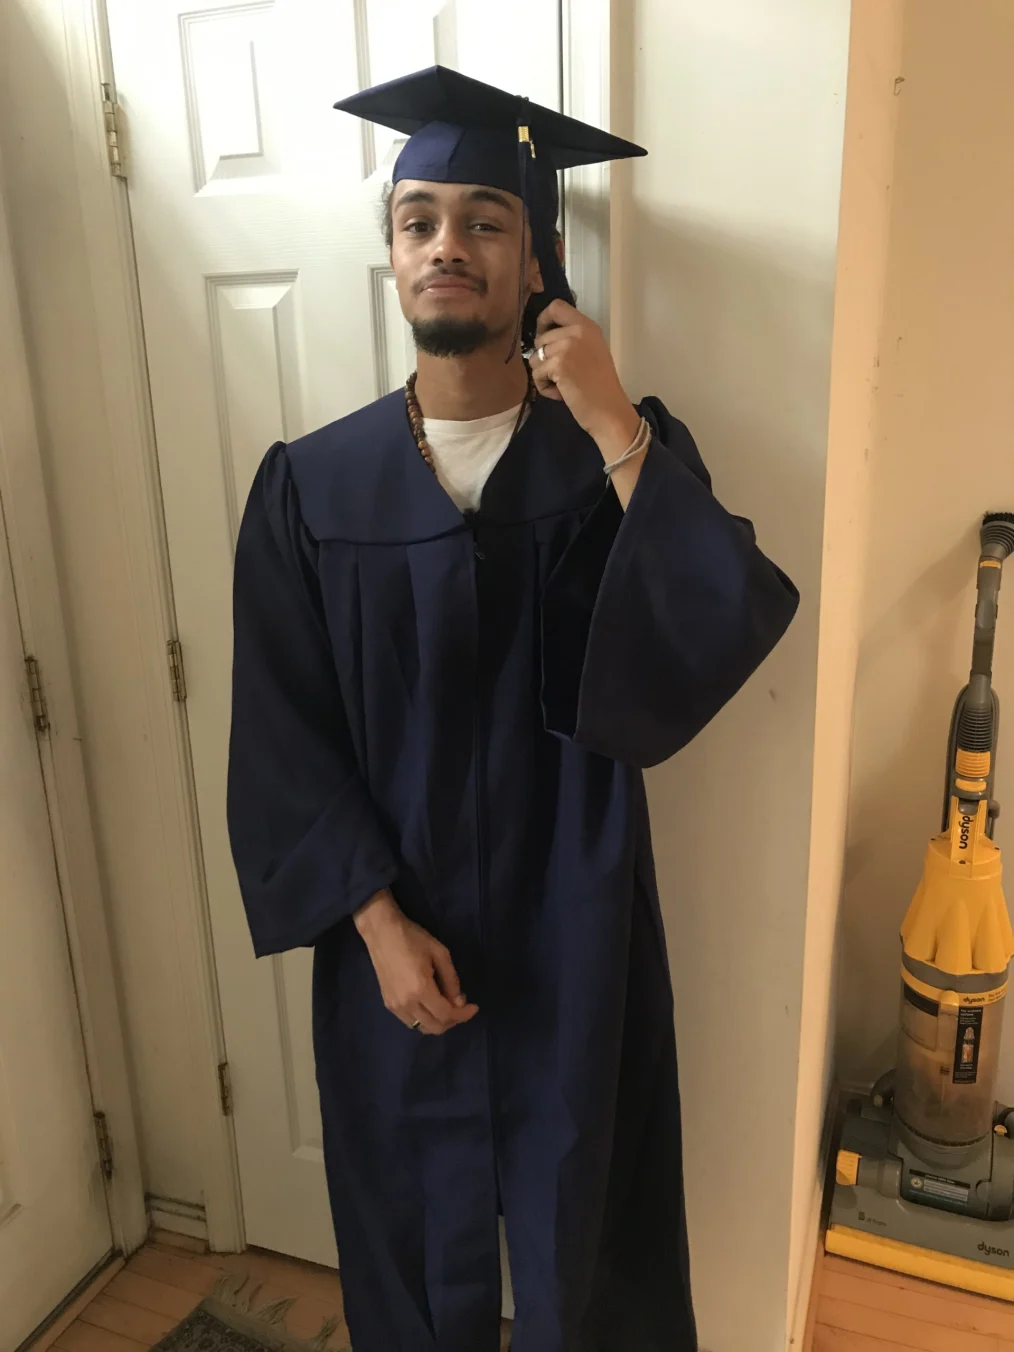 A male with a light-medium skin tone takes a picture in hs cap and gown